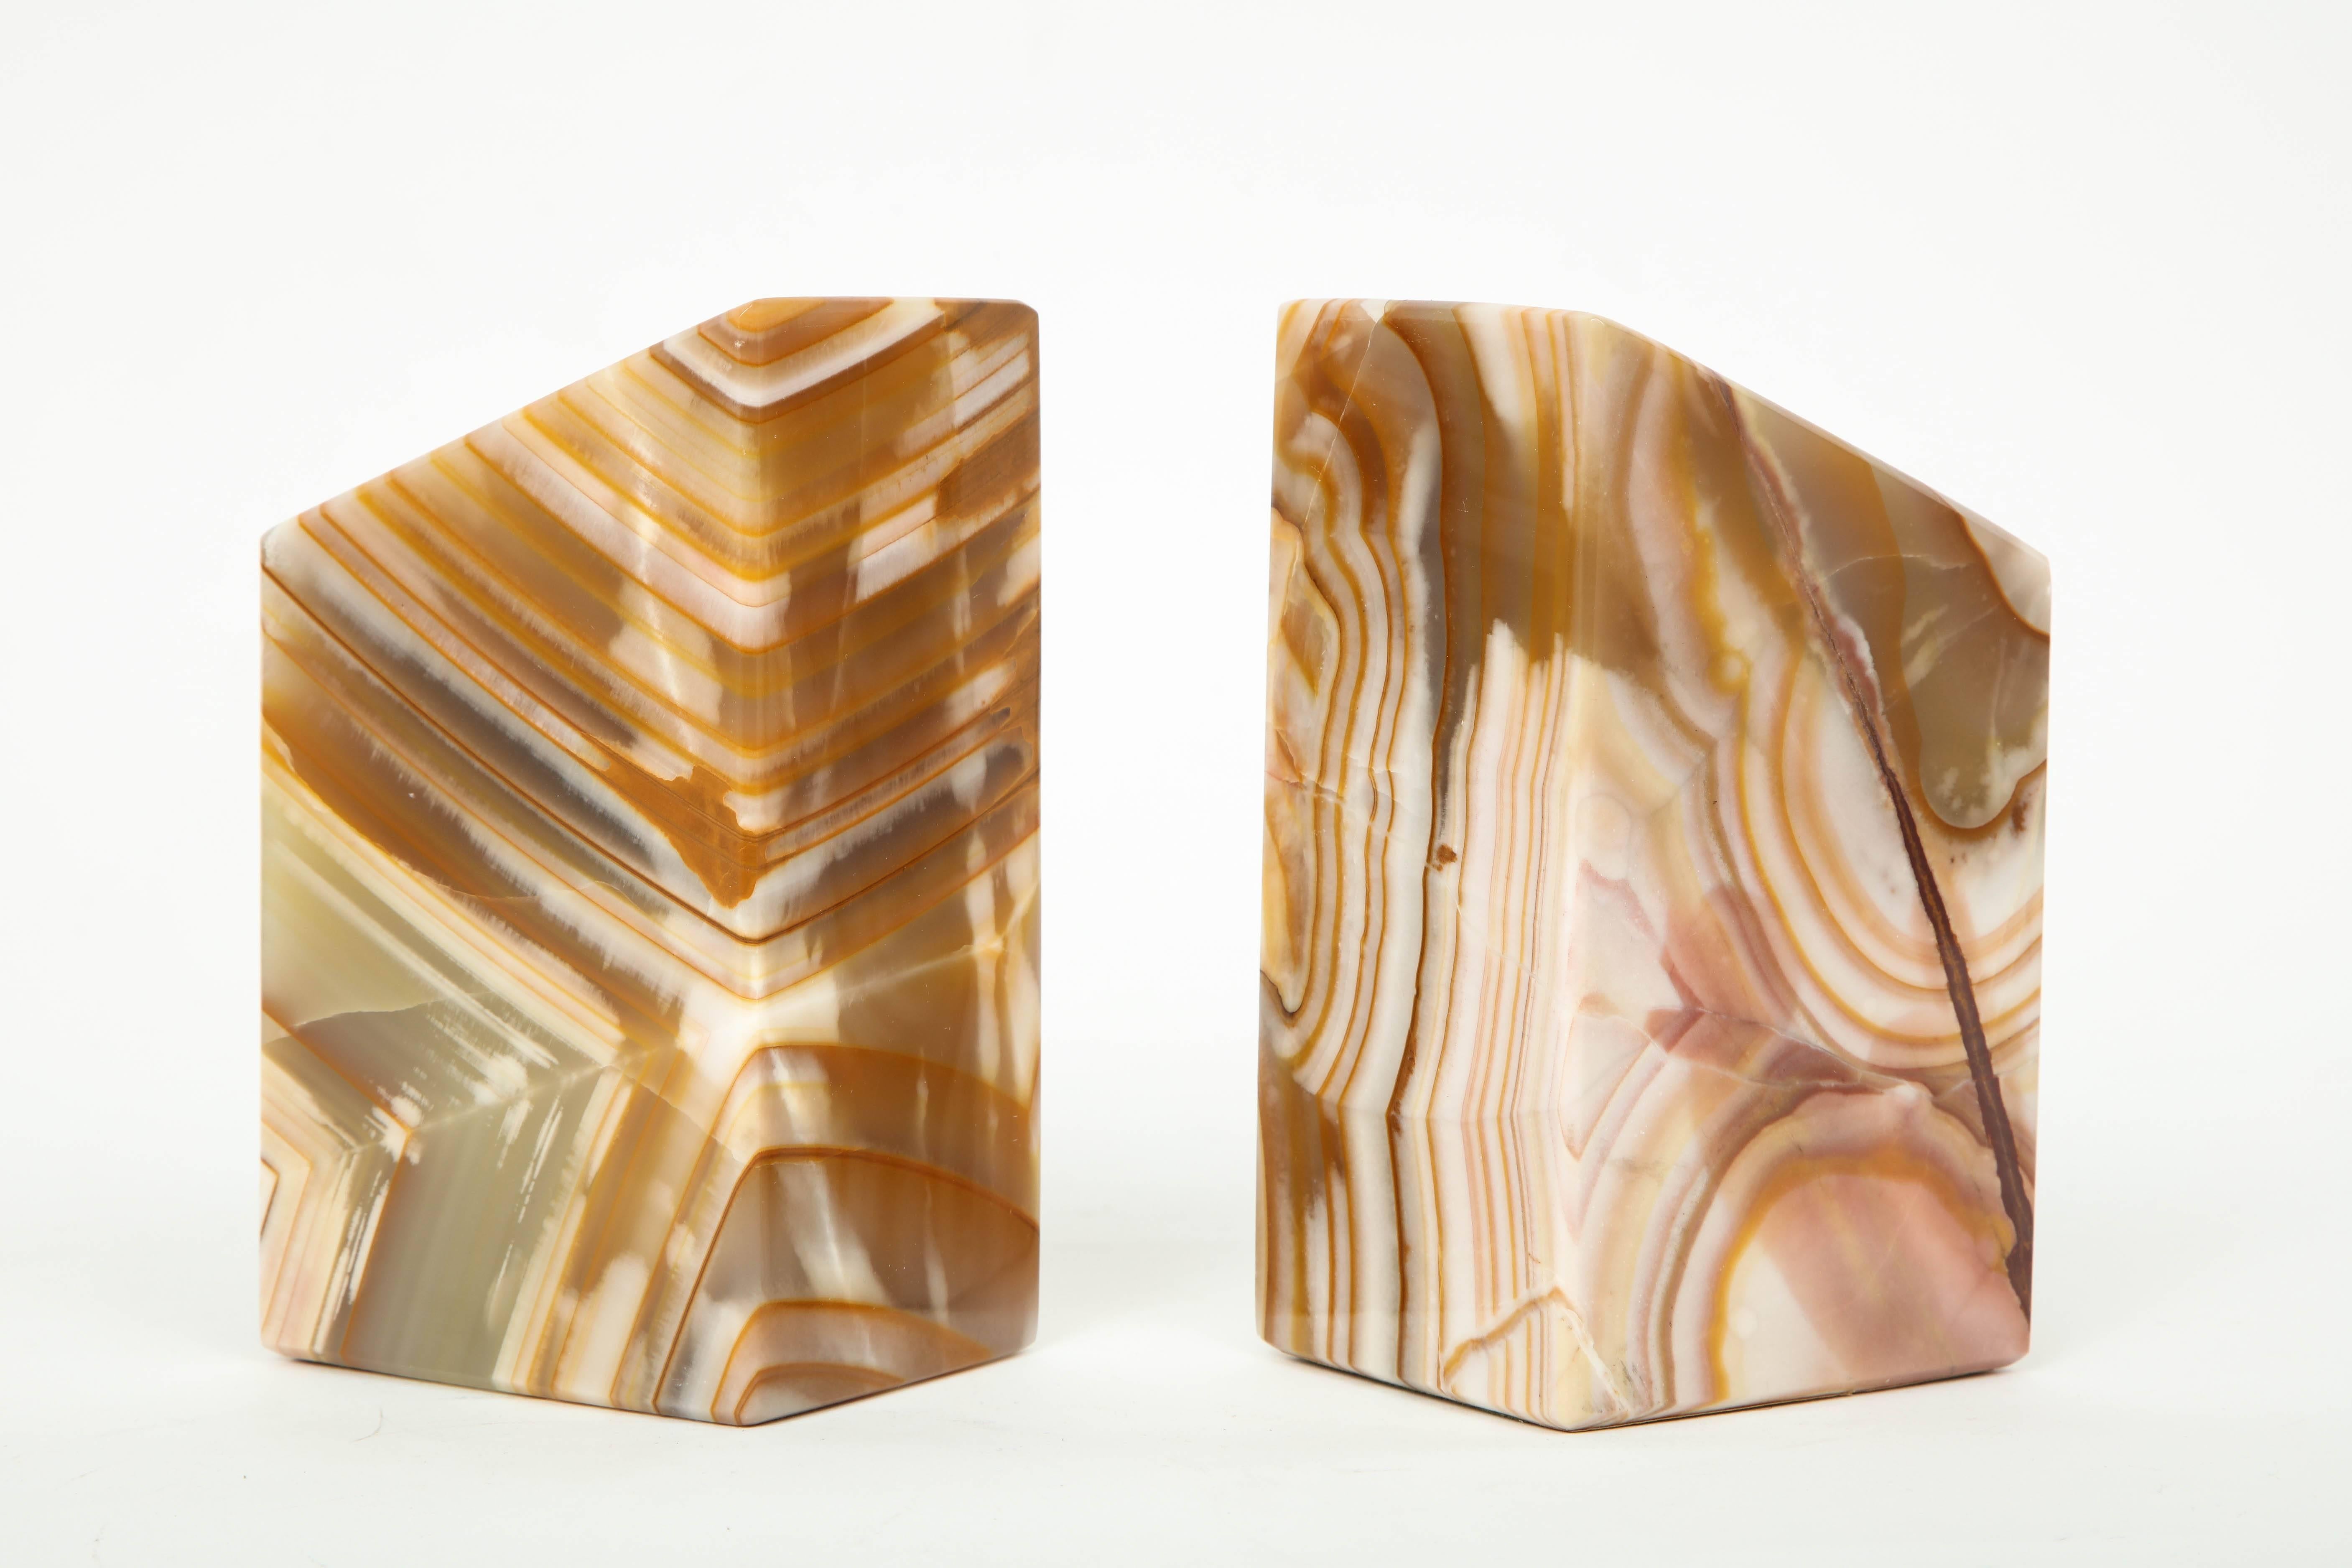 20th Century Pair of Solid Onyx Bookends